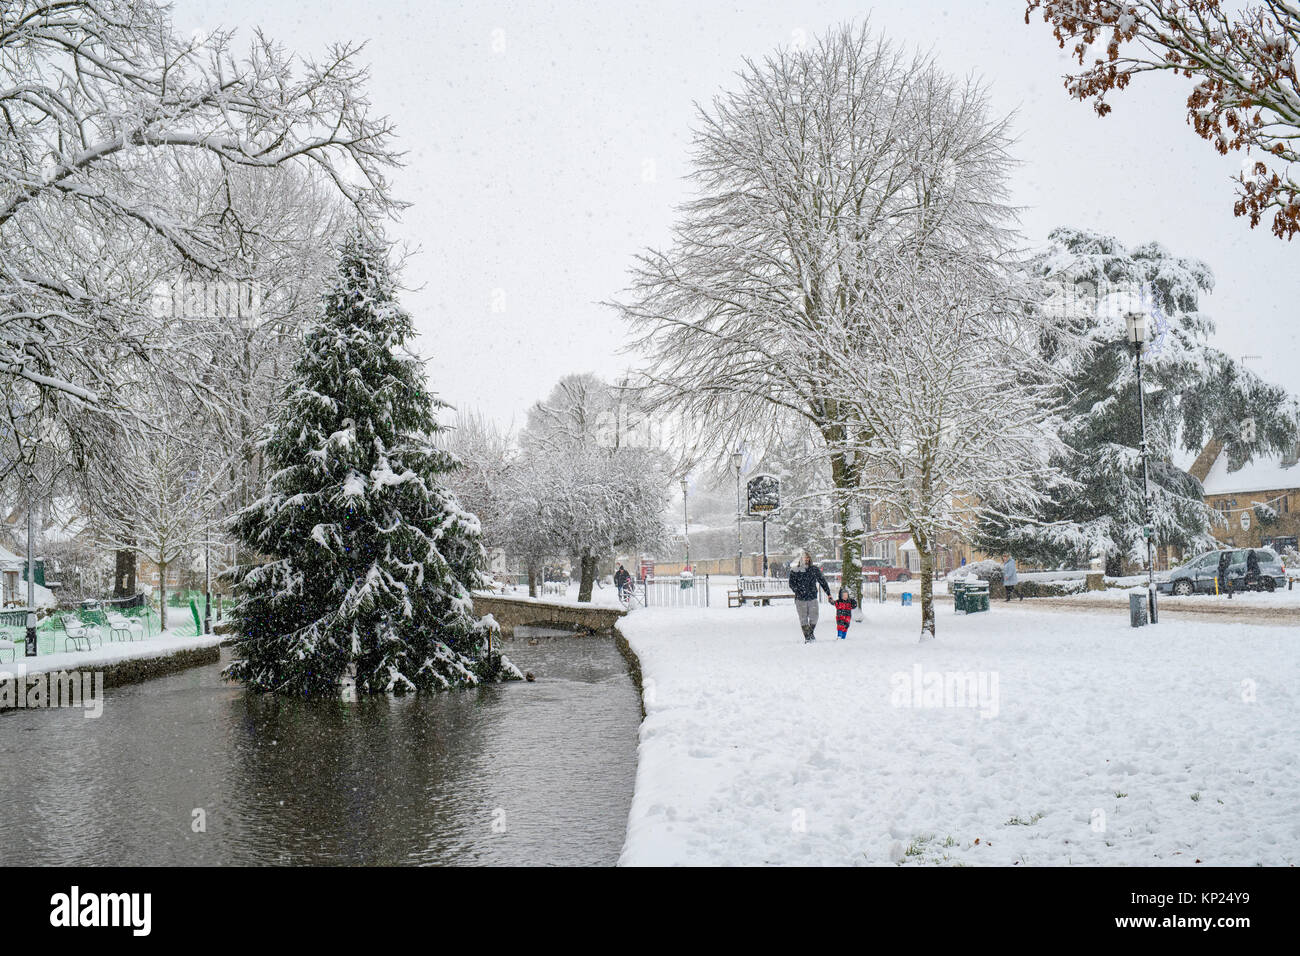 Falling snow covering the Christmas tree in Bourton on the Water, Cotswolds, Gloucestershire, England Stock Photo